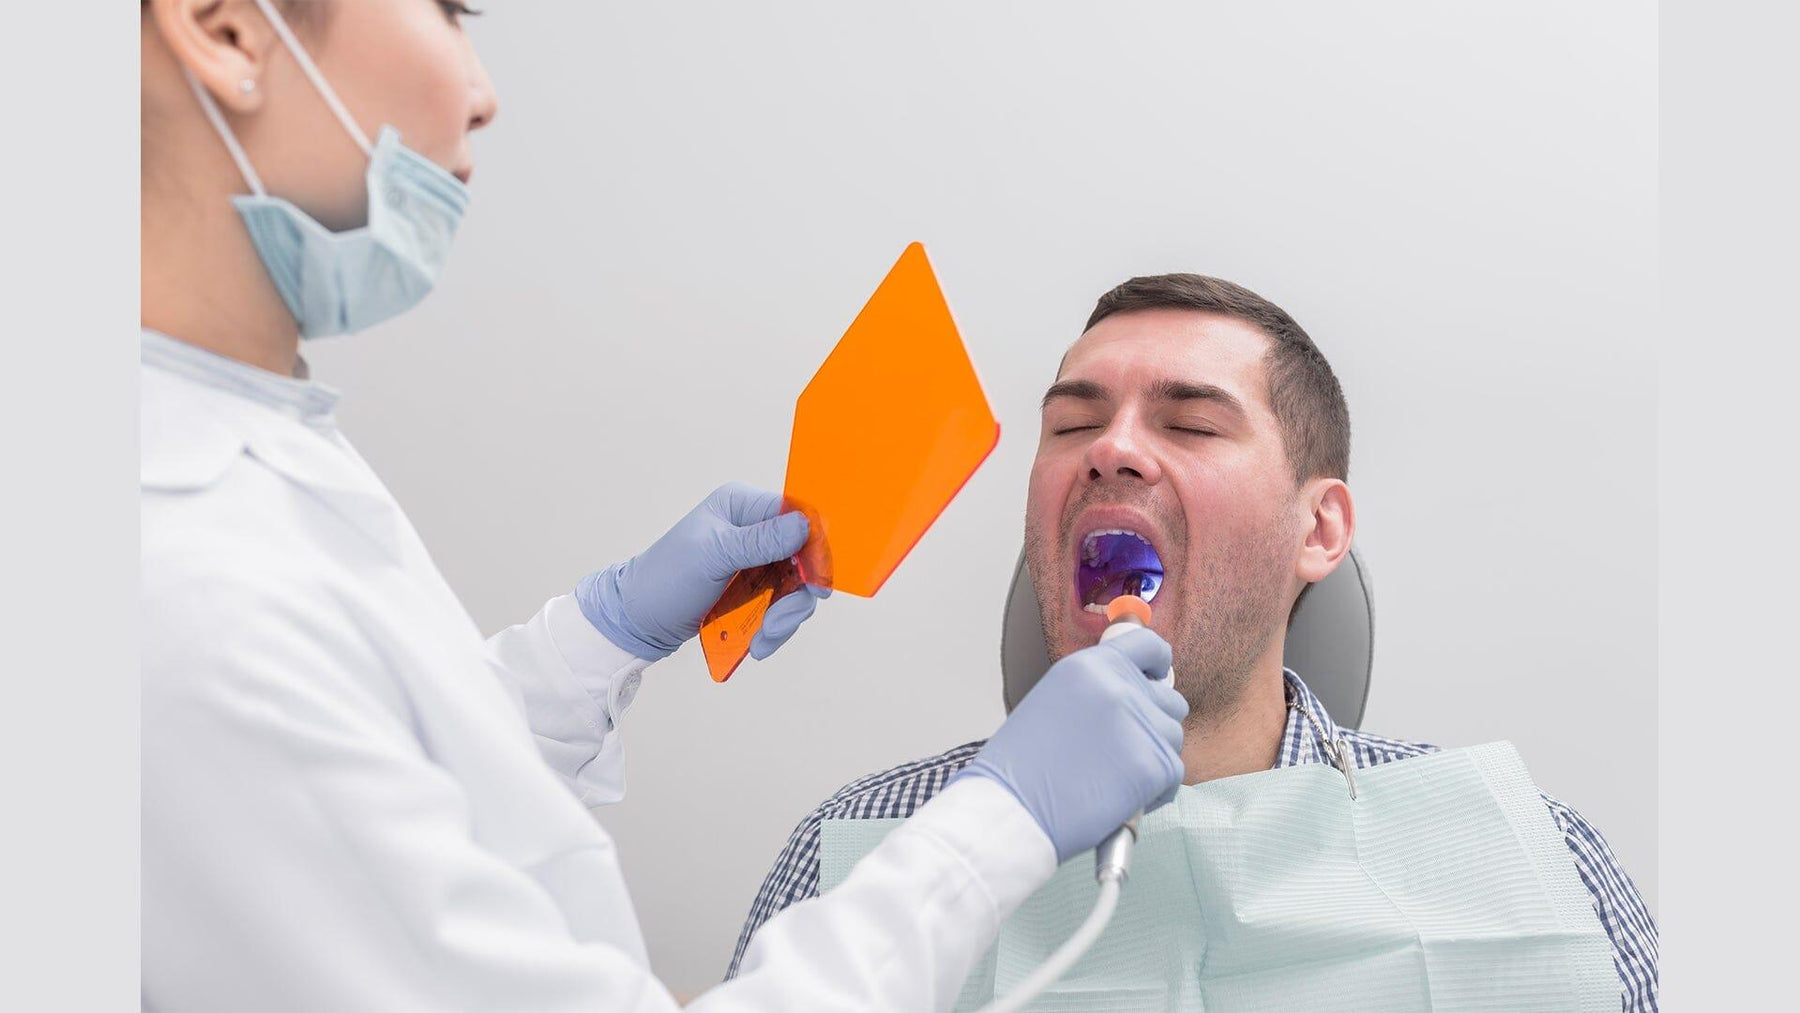 The Importance of PPE for Dental Hygienists